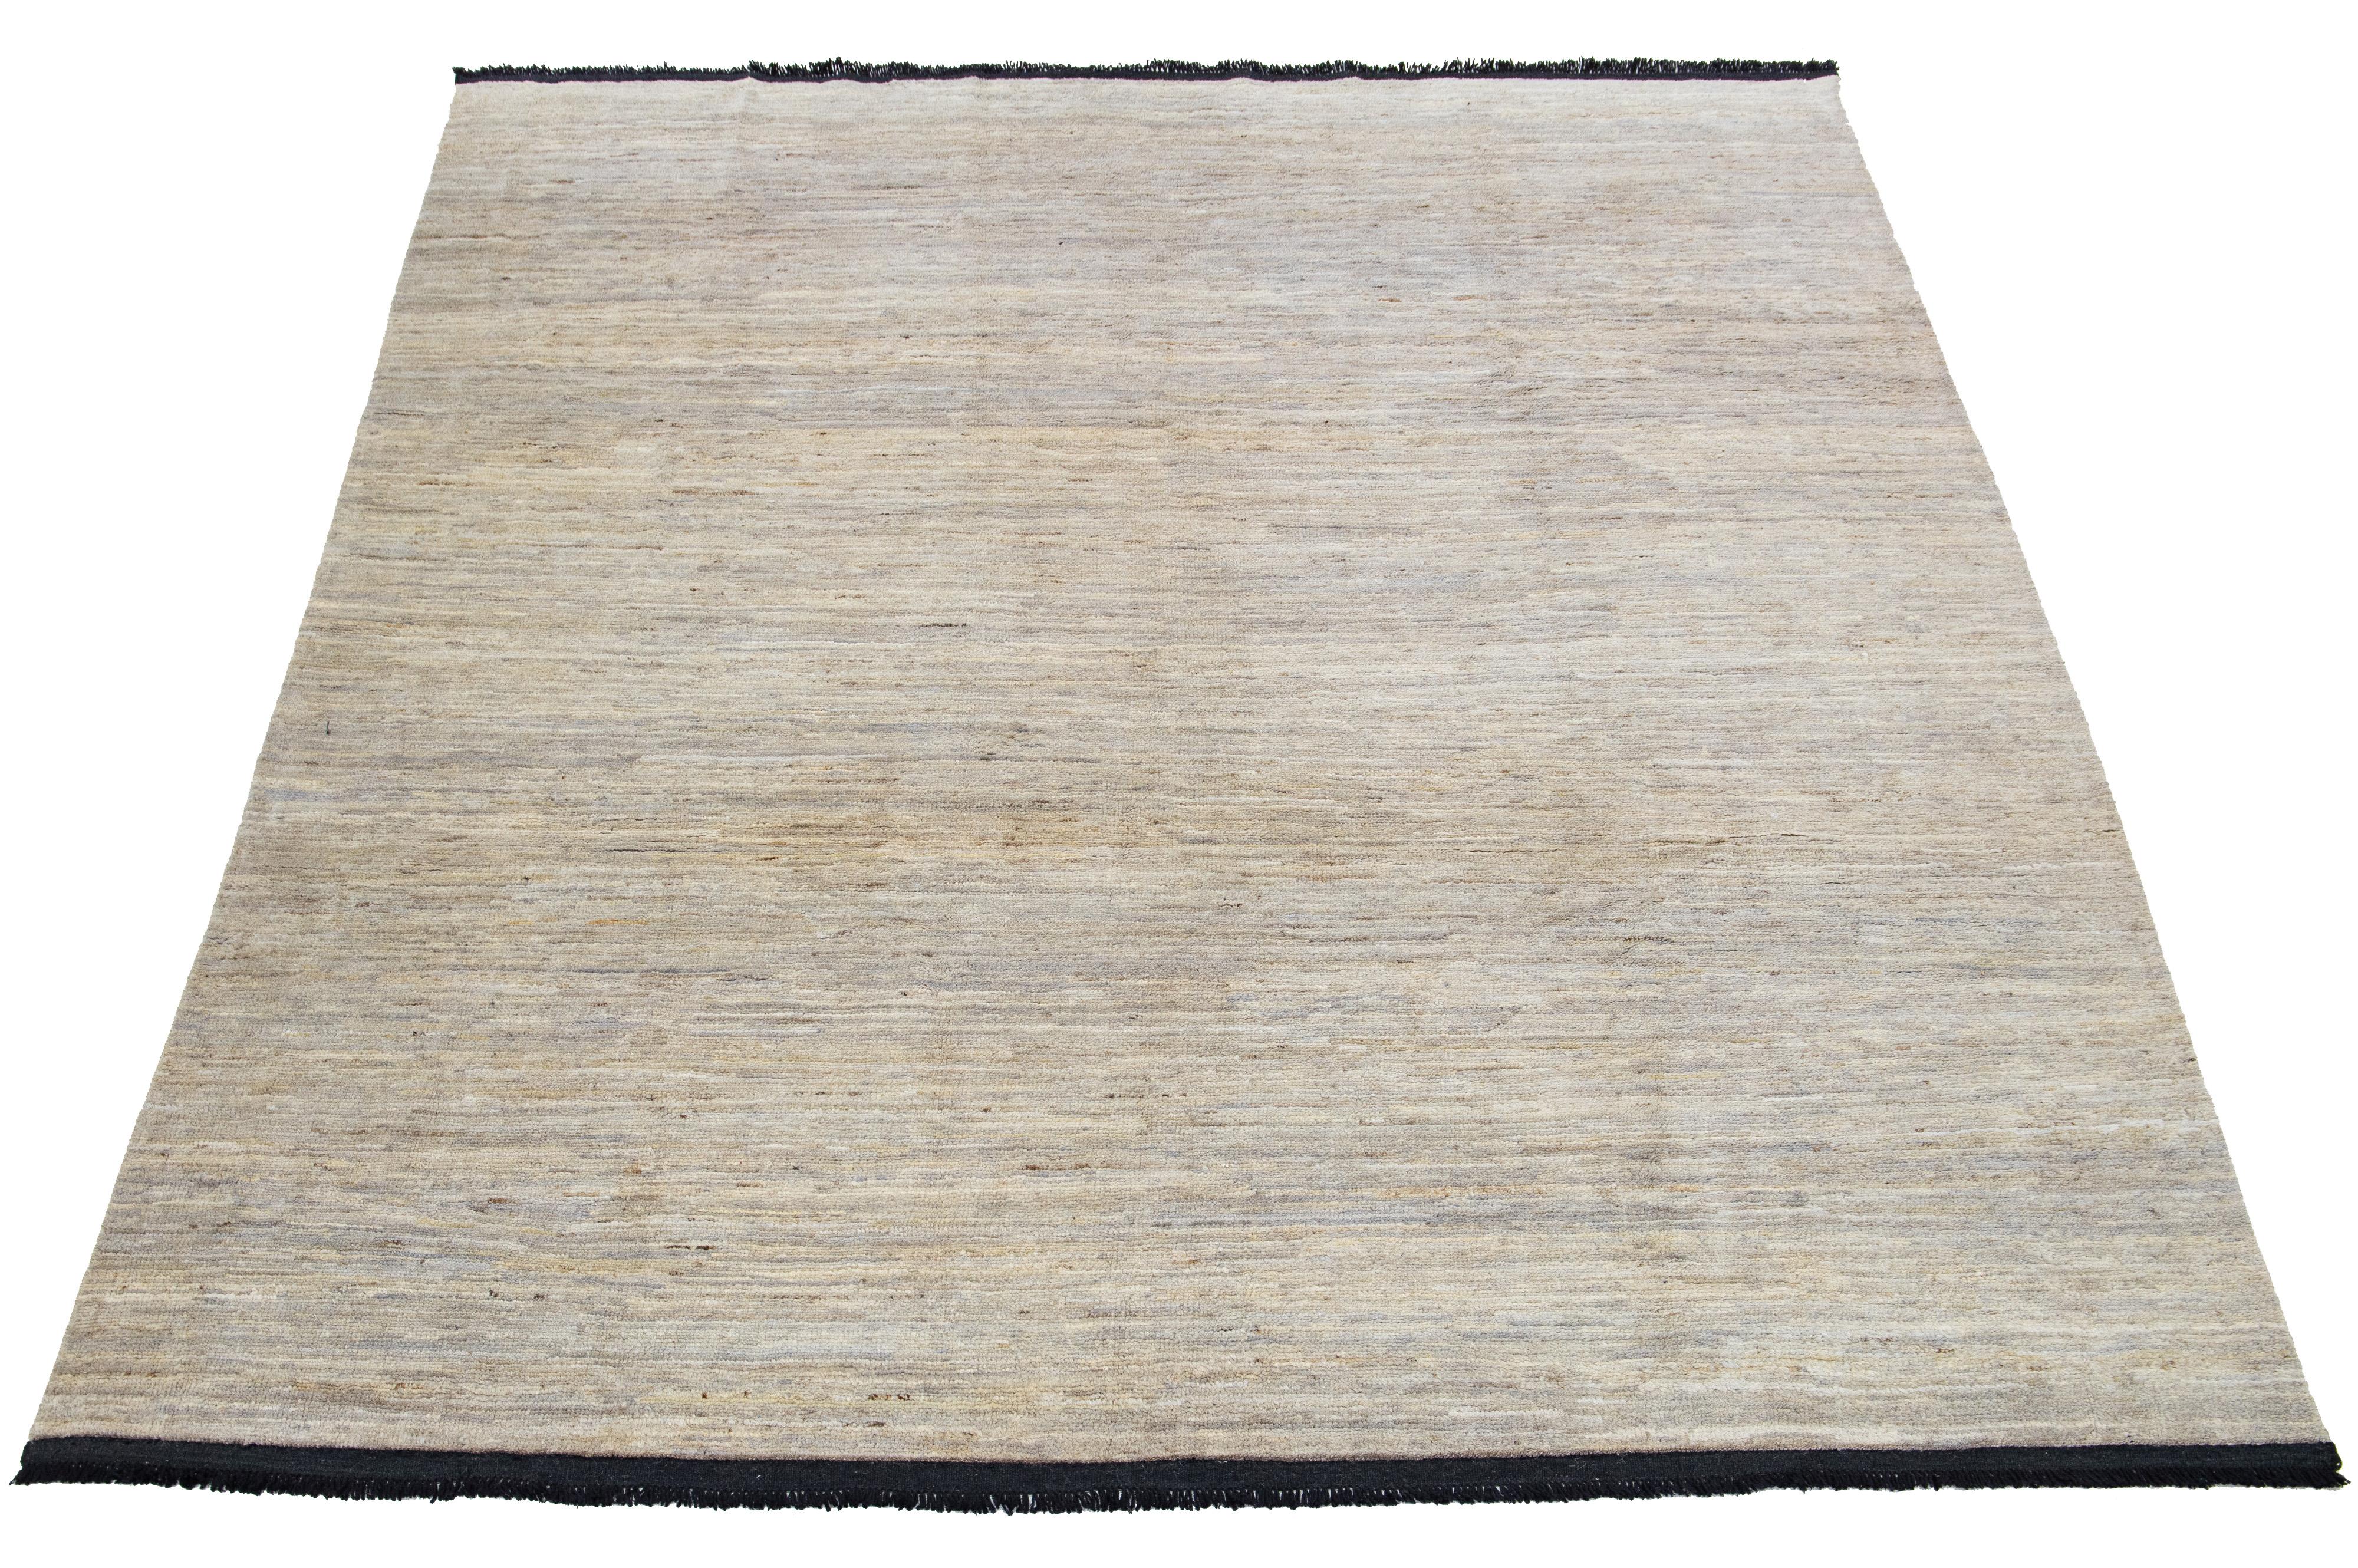 This handcrafted wool rug, designed in the Gabbeh style, showcases a solid design accentuated by gray shades against a beige background with black fringes.

This rug measures 8' x 10'.

Our rugs are professionally cleaned before shipping.